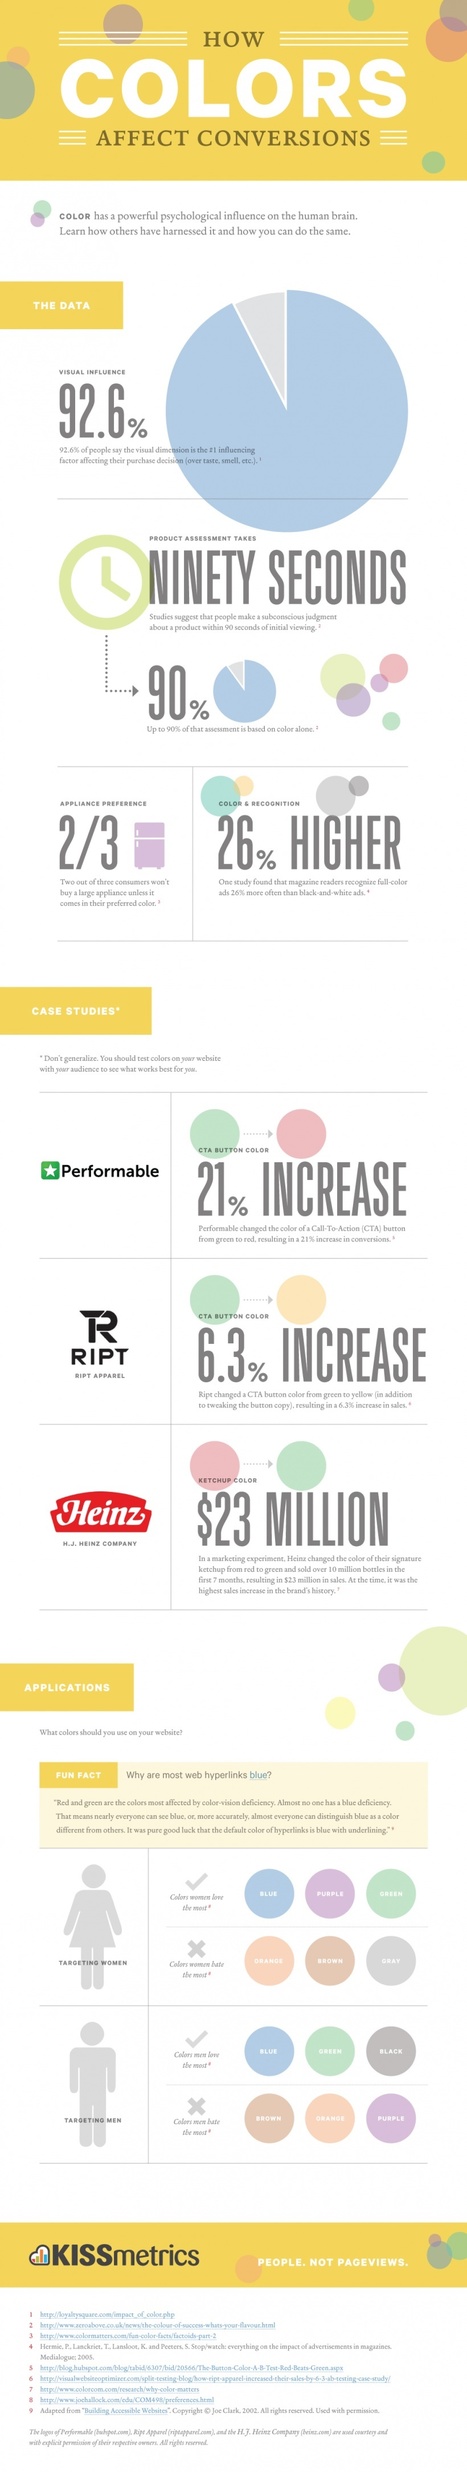 How Colors Affect Conversions [Infographic] | Business Improvement and Social media | Scoop.it